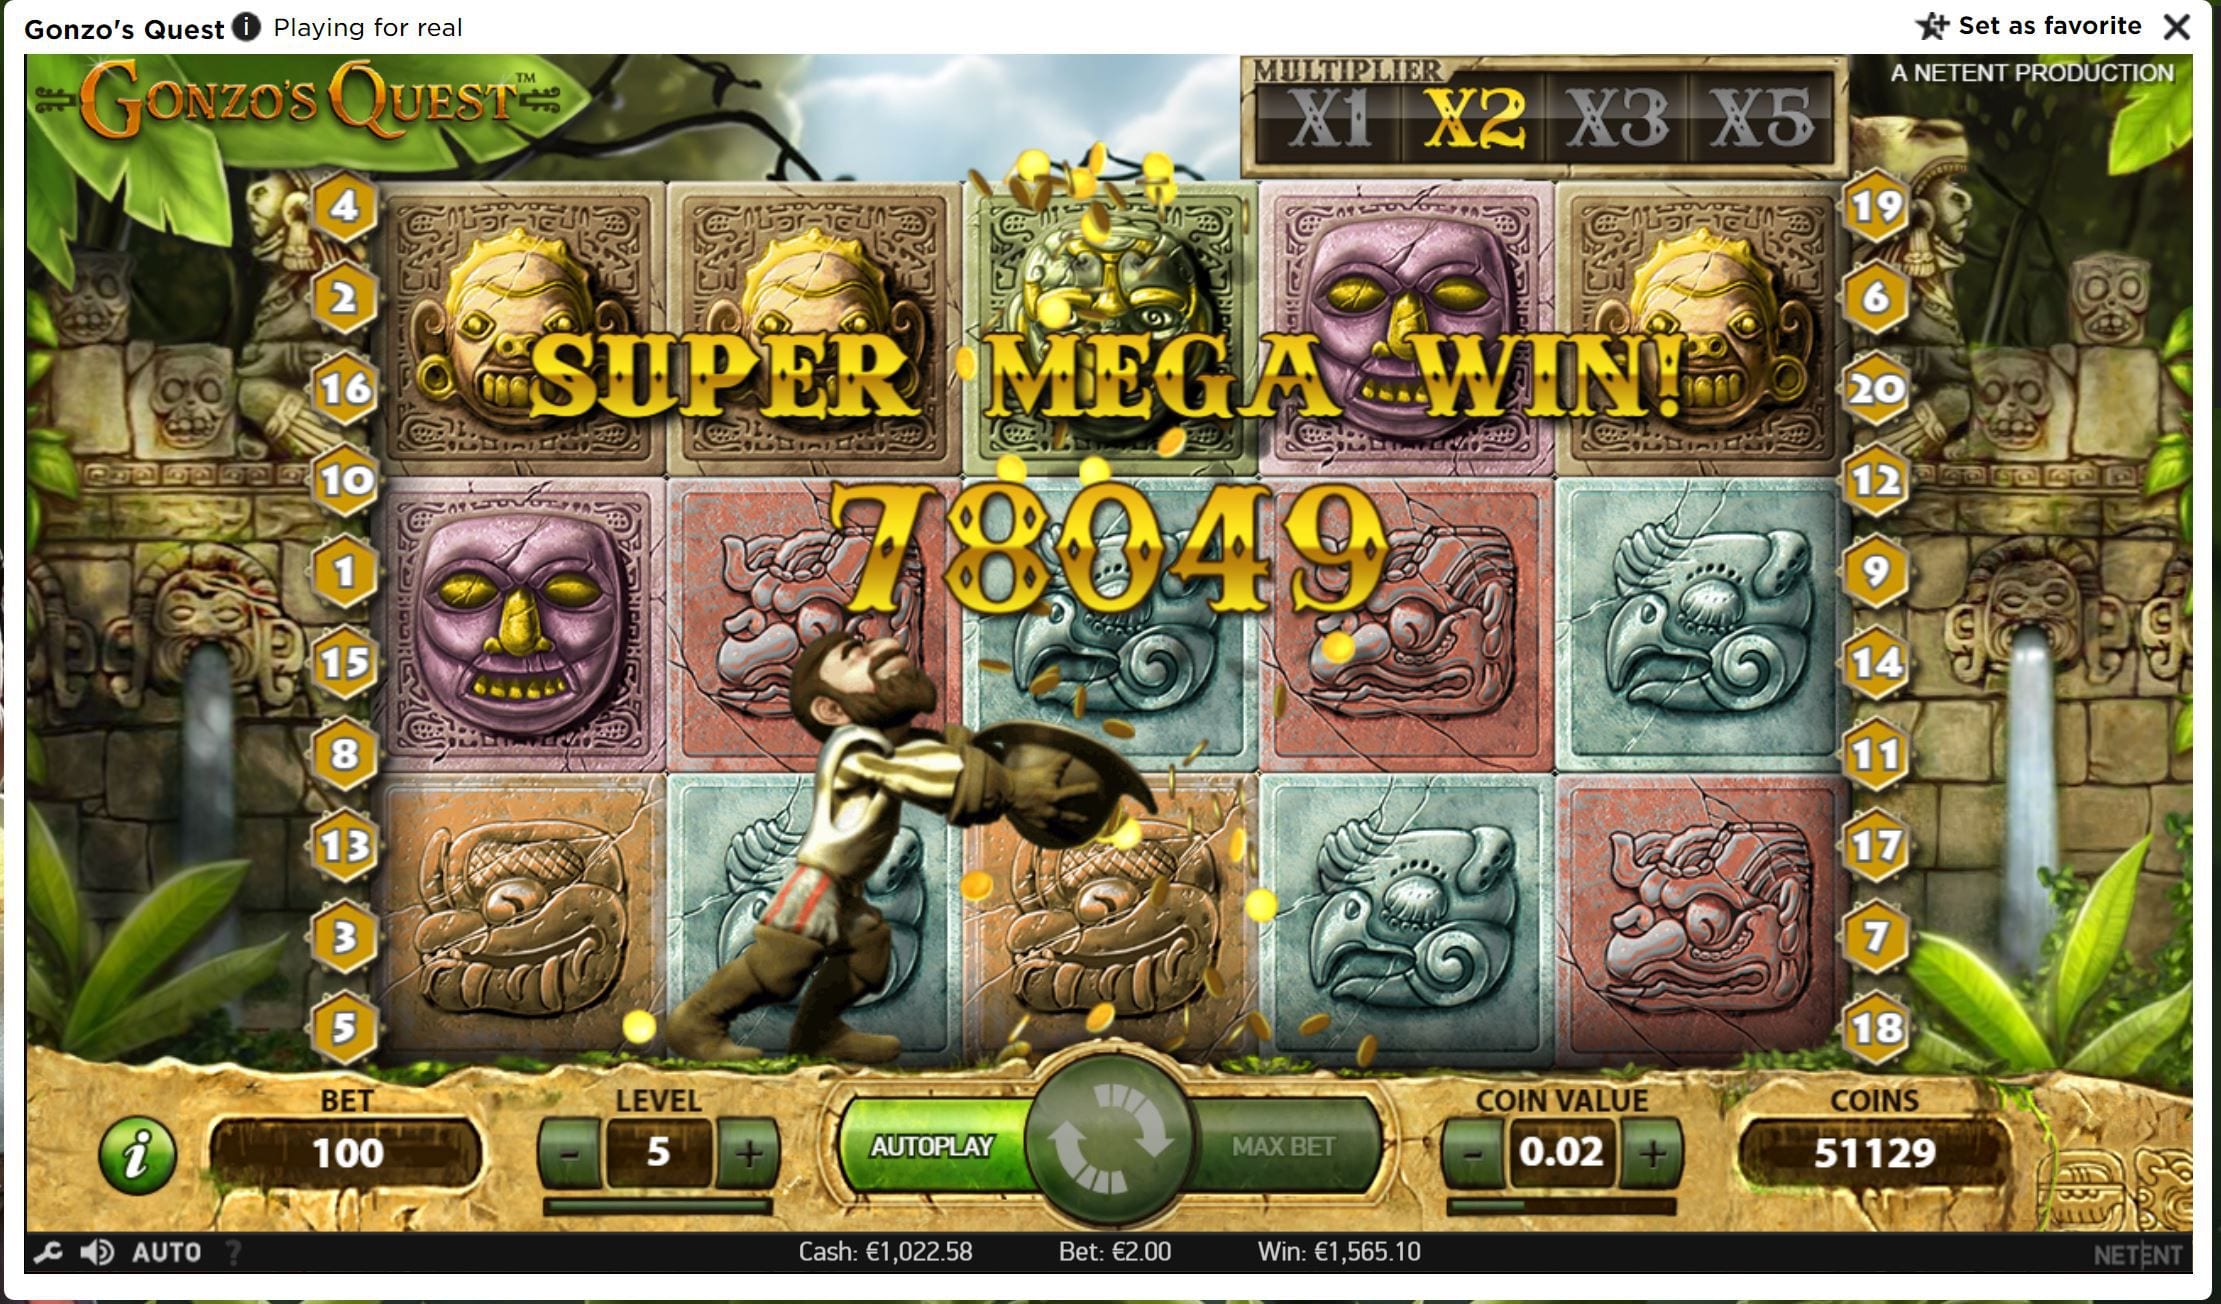 Gonzos Quest Free Online Slots free slot games for kindle fire 